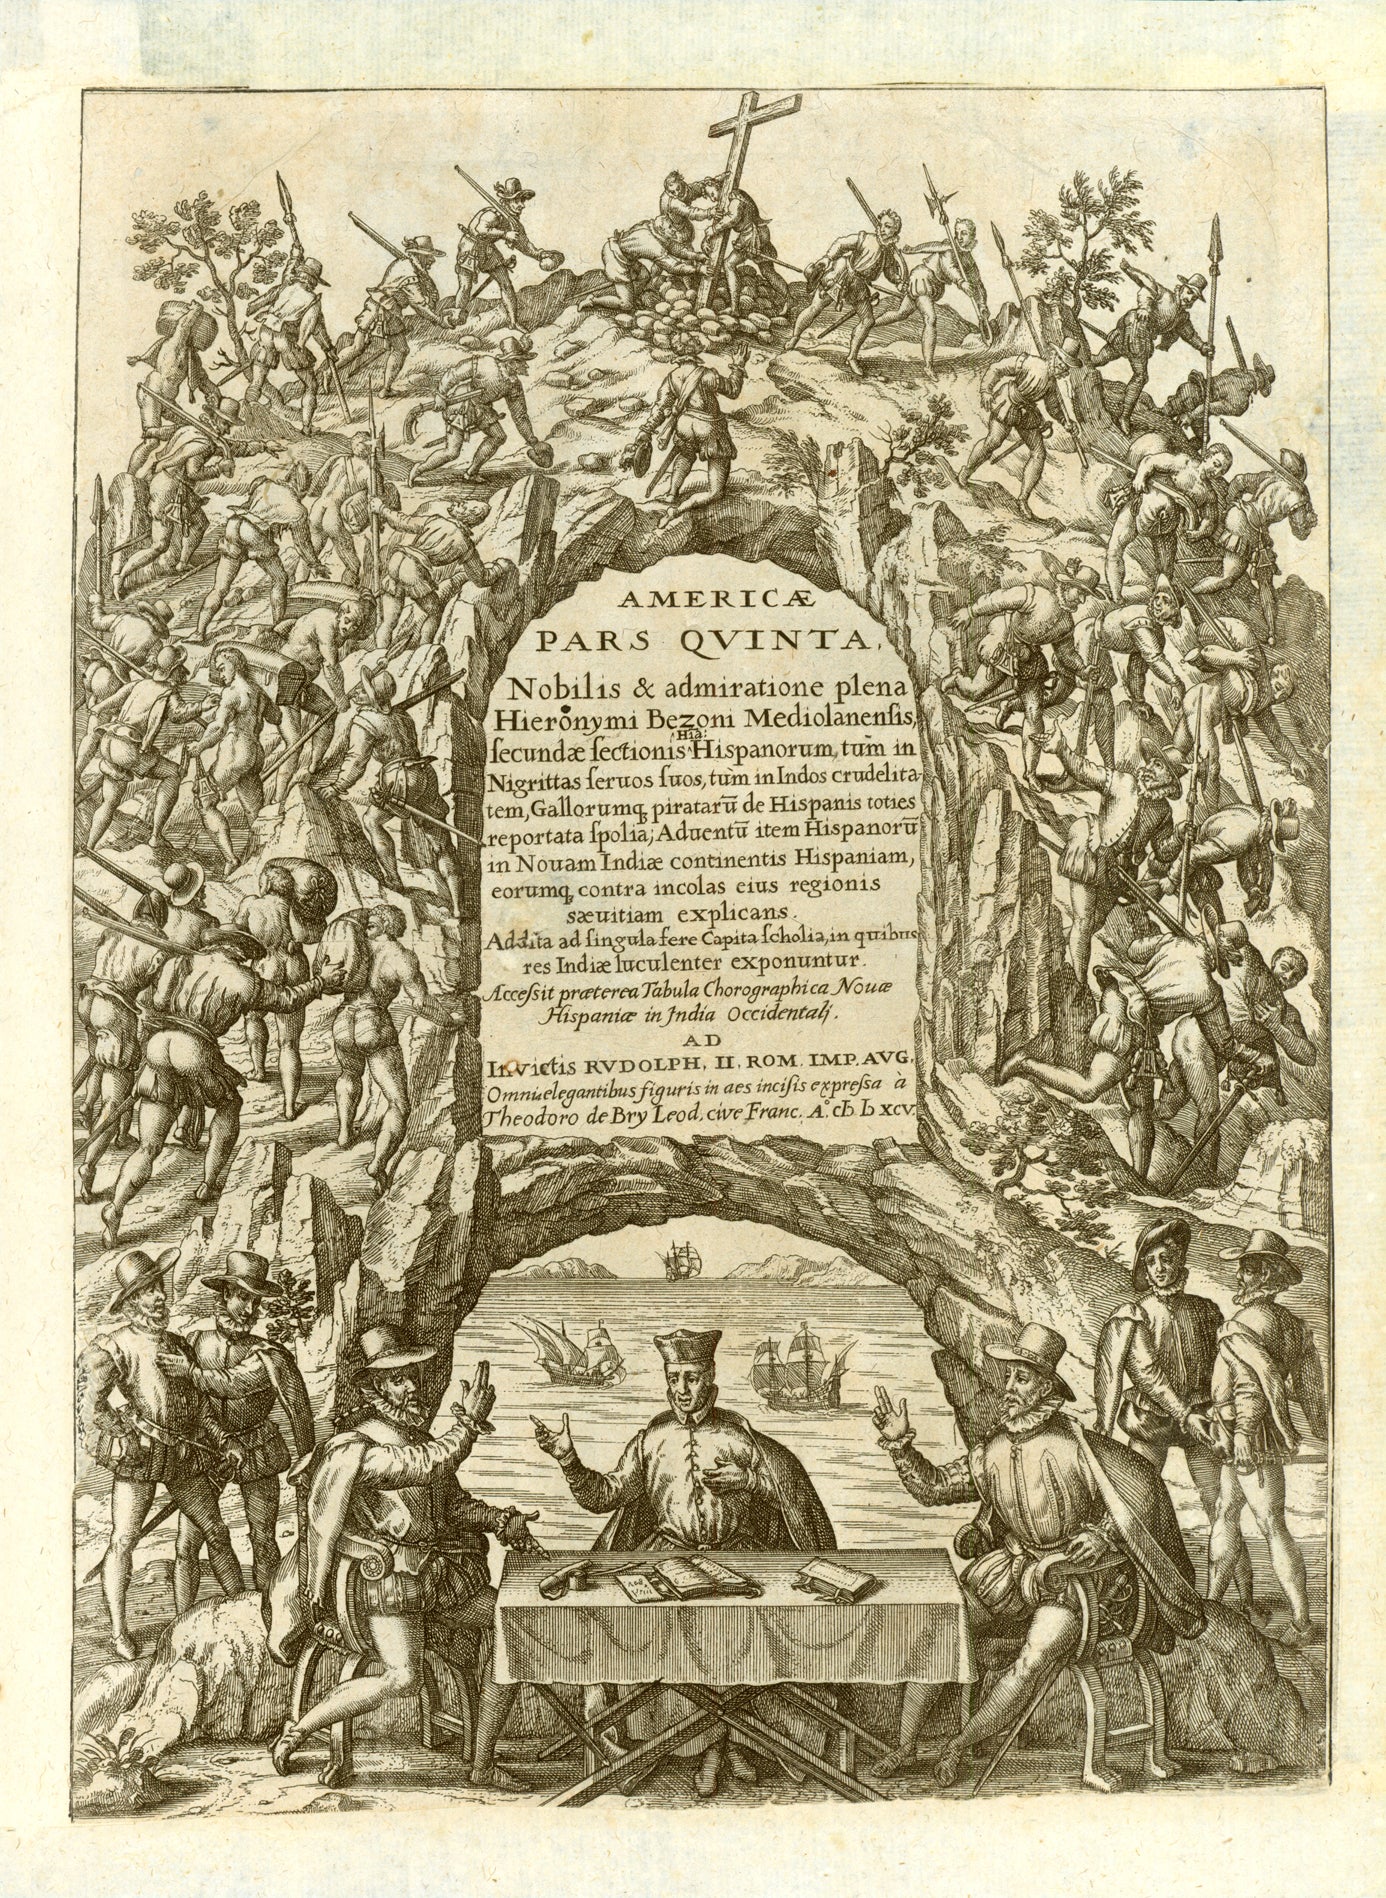 "Americae Pars Quinta Nobilis et admiratione plena Hieronymi Benzoni Mediolanensis, secundae sectionis Hispanorum"  Title page - copper etching - for the fifth volume of the famous America Discovery Account, published by de Bry  Author: Girolamo Benzoni (1519-1572)  Copper etching. Title Page for Book V.  Publishing House Theodor de Bry (1528-1598)  Publisher: Johann Theodor de Bry (1560-1623)  The date in the title catriuche on the title page reads 1595. But the book was actually only published in Frankfur